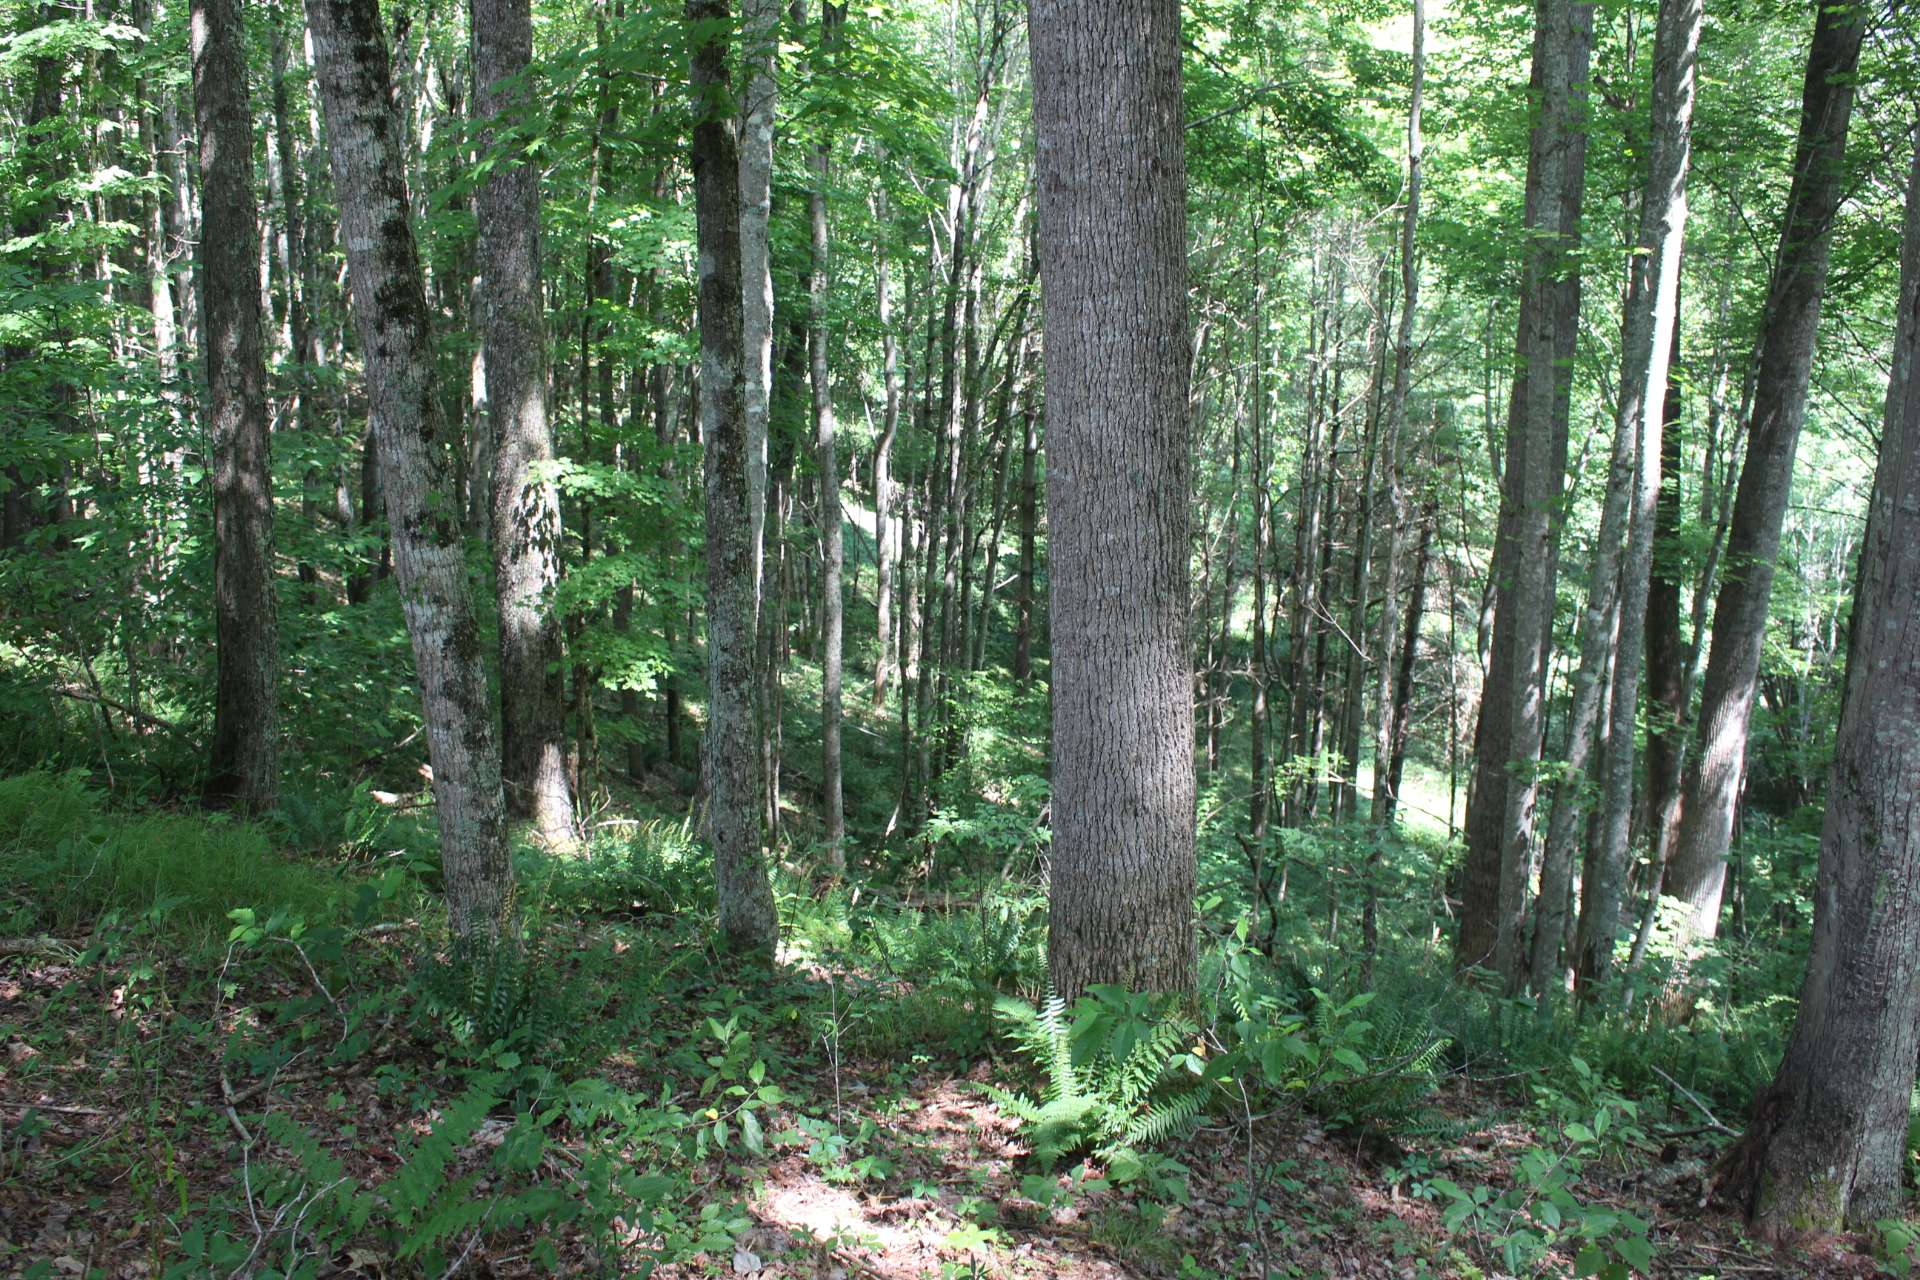 The terrain is mixed with Native hardwoods, evergreens and native mountain foliage.